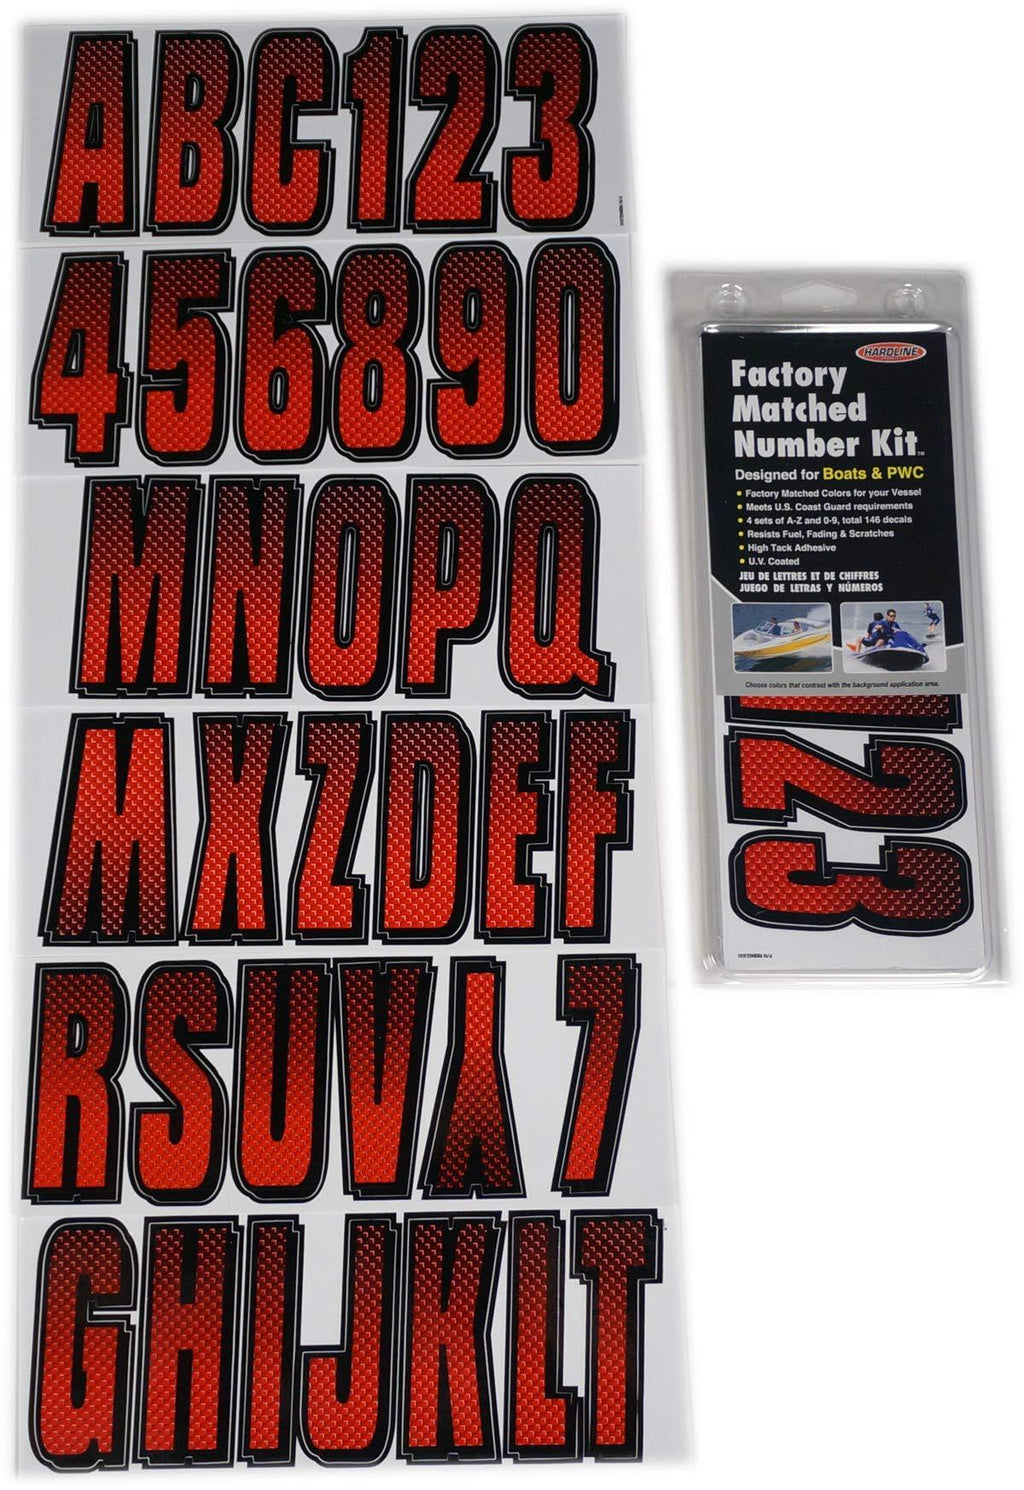  [AUSTRALIA] - Hardline Products Series 300 Factory Matched 3-Inch Boat & PWC Registration Number Kit, Red/Black